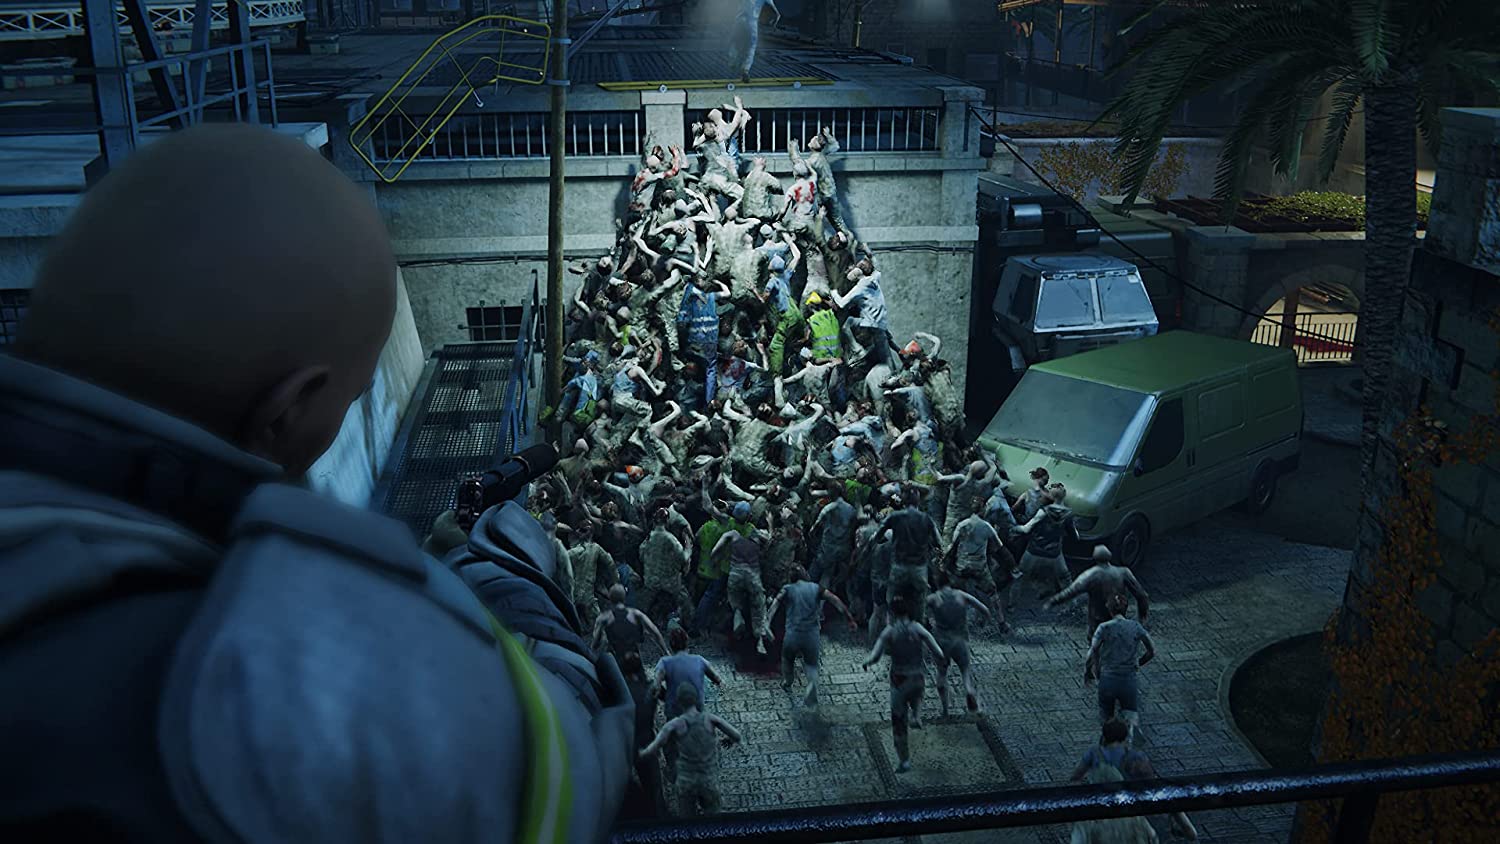 world war z game review